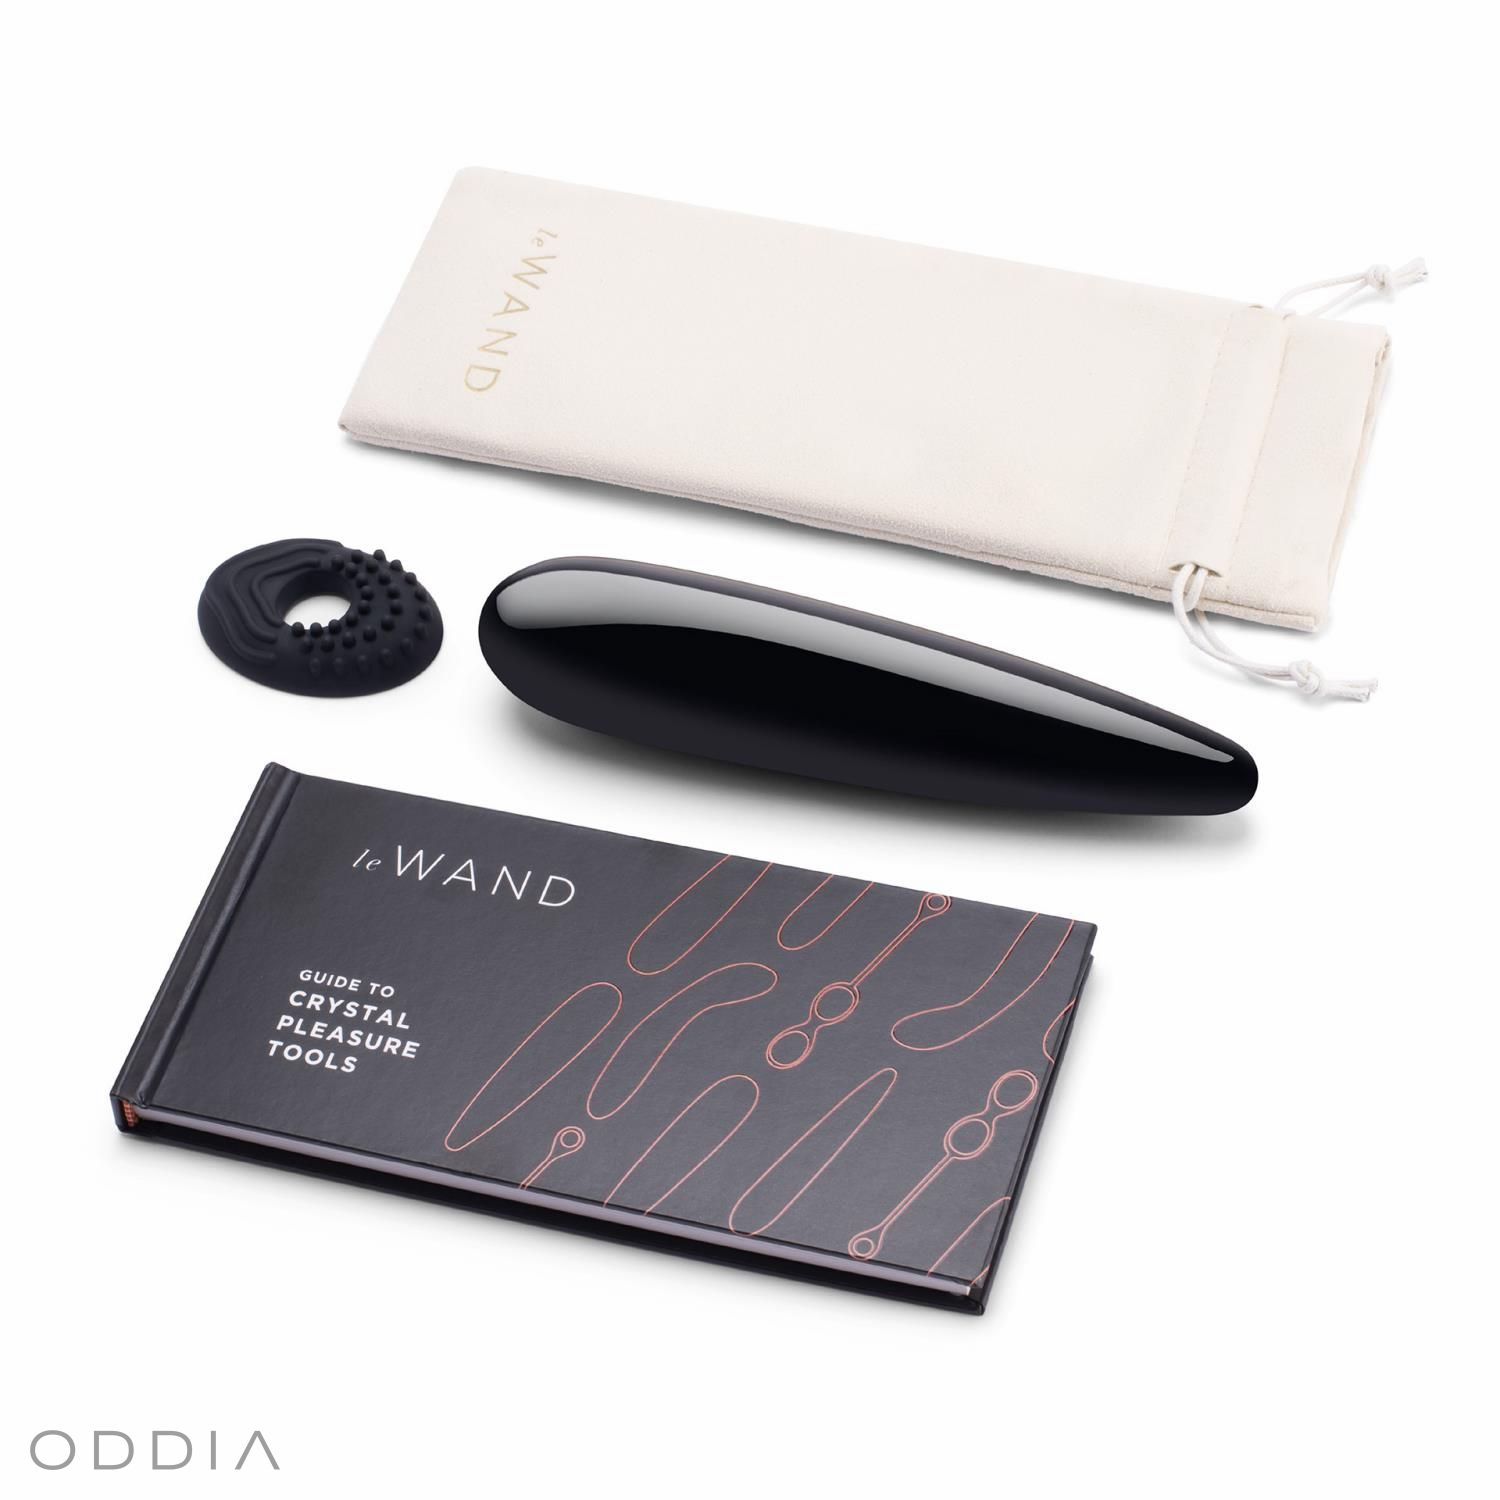 Luxurious straight dildo from the brand leWAND, made from real black obsidian - strong and heavy.